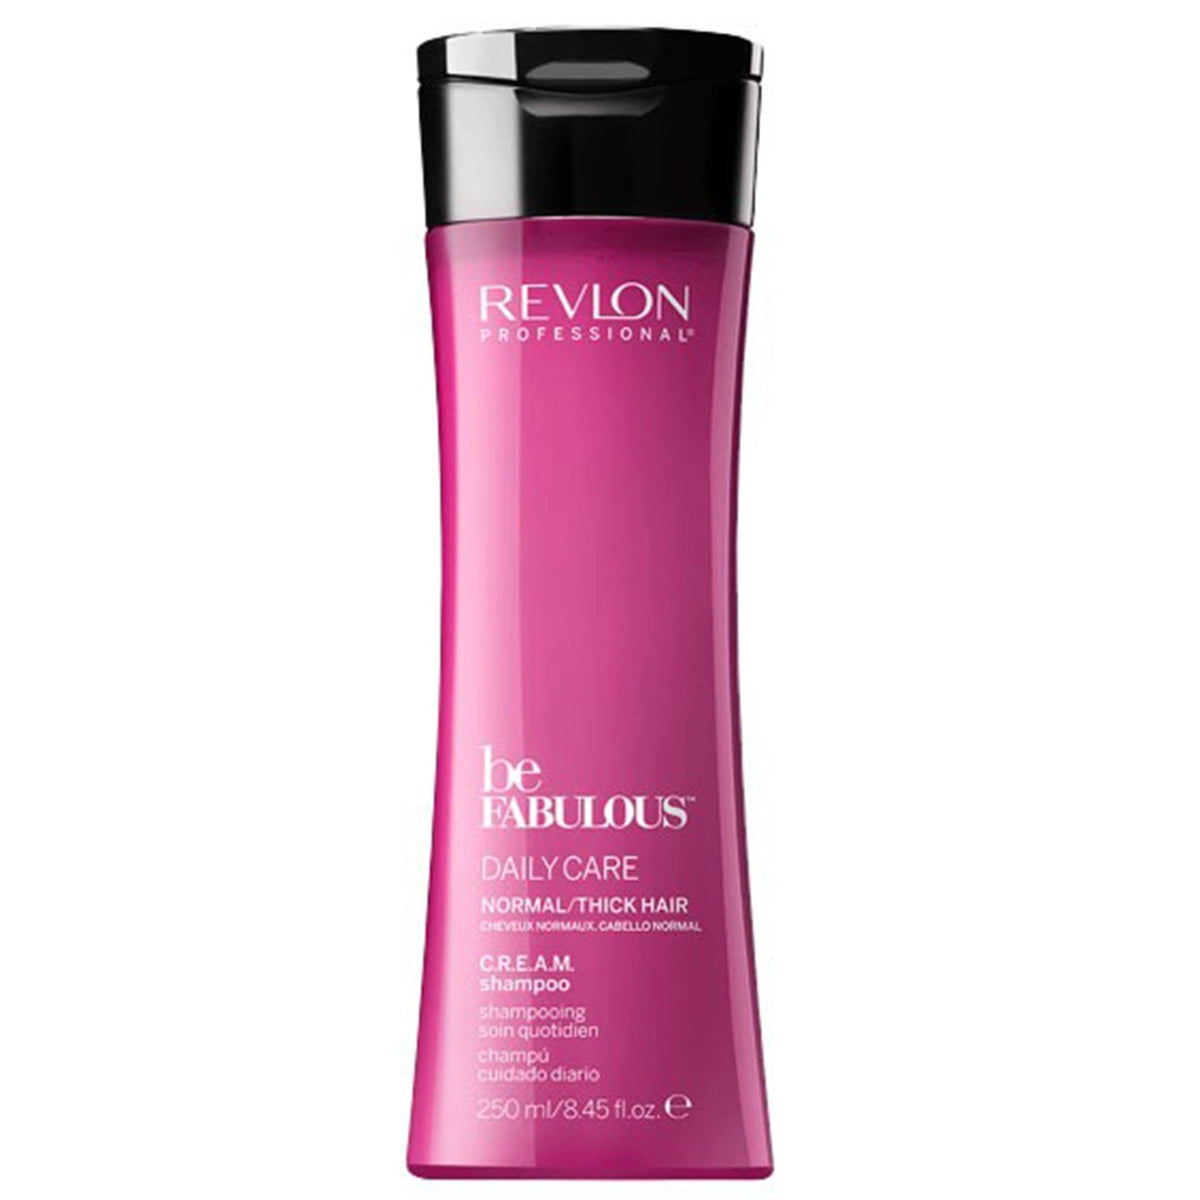 Revlon Professional Be Fabulous Daily Care Normal/Thick Shampoo 250ml